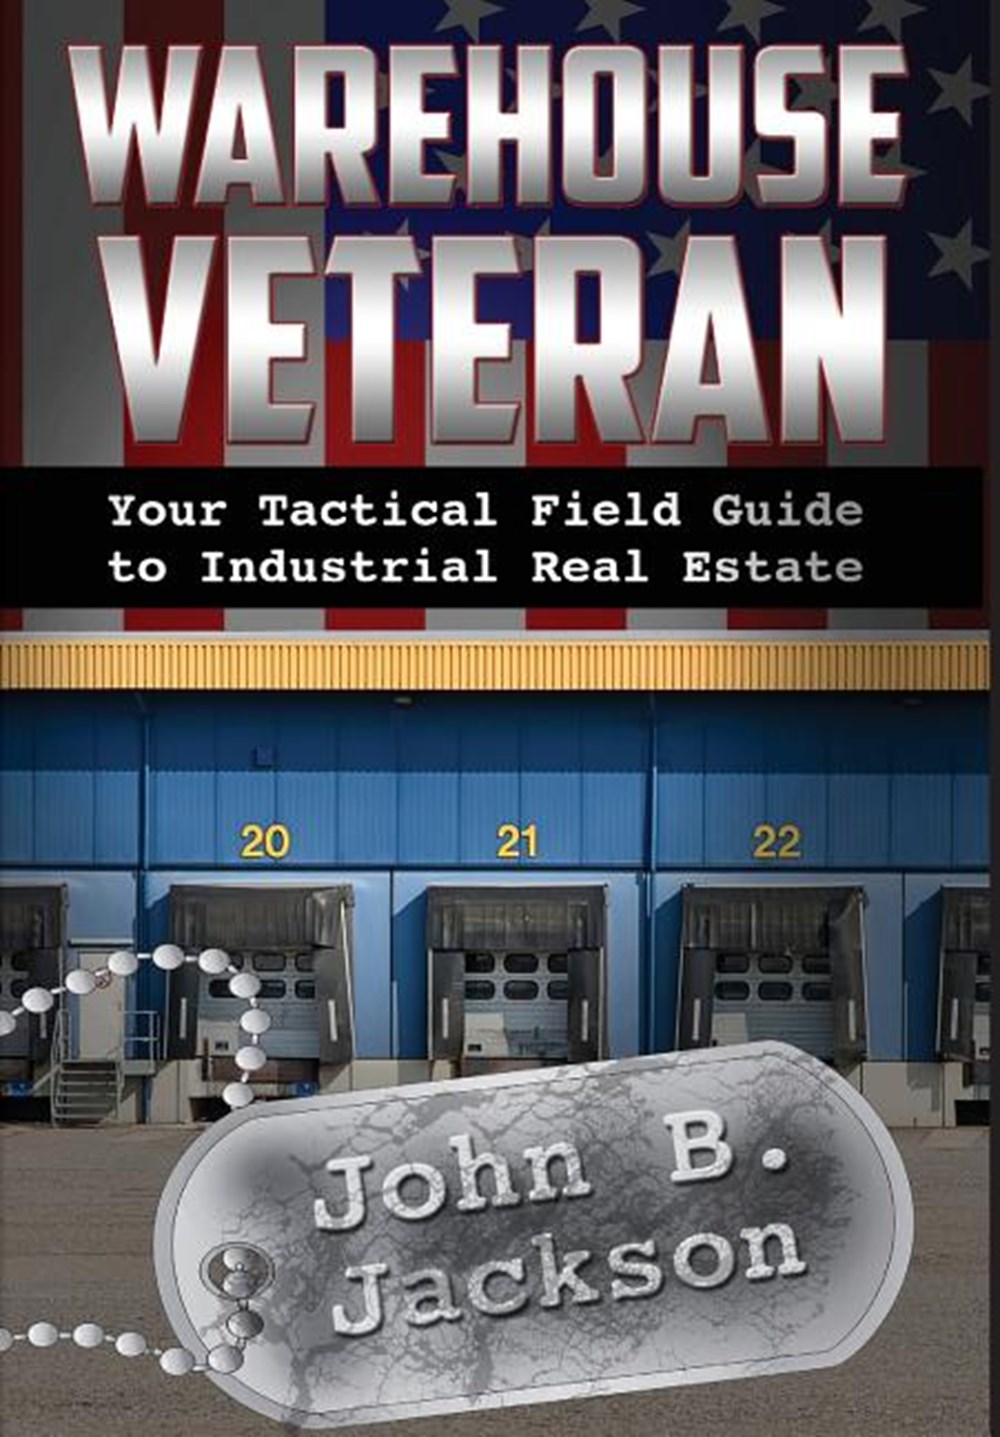 Warehouse Veteran: Your Tactical Field Guide to Industrial Real Estate